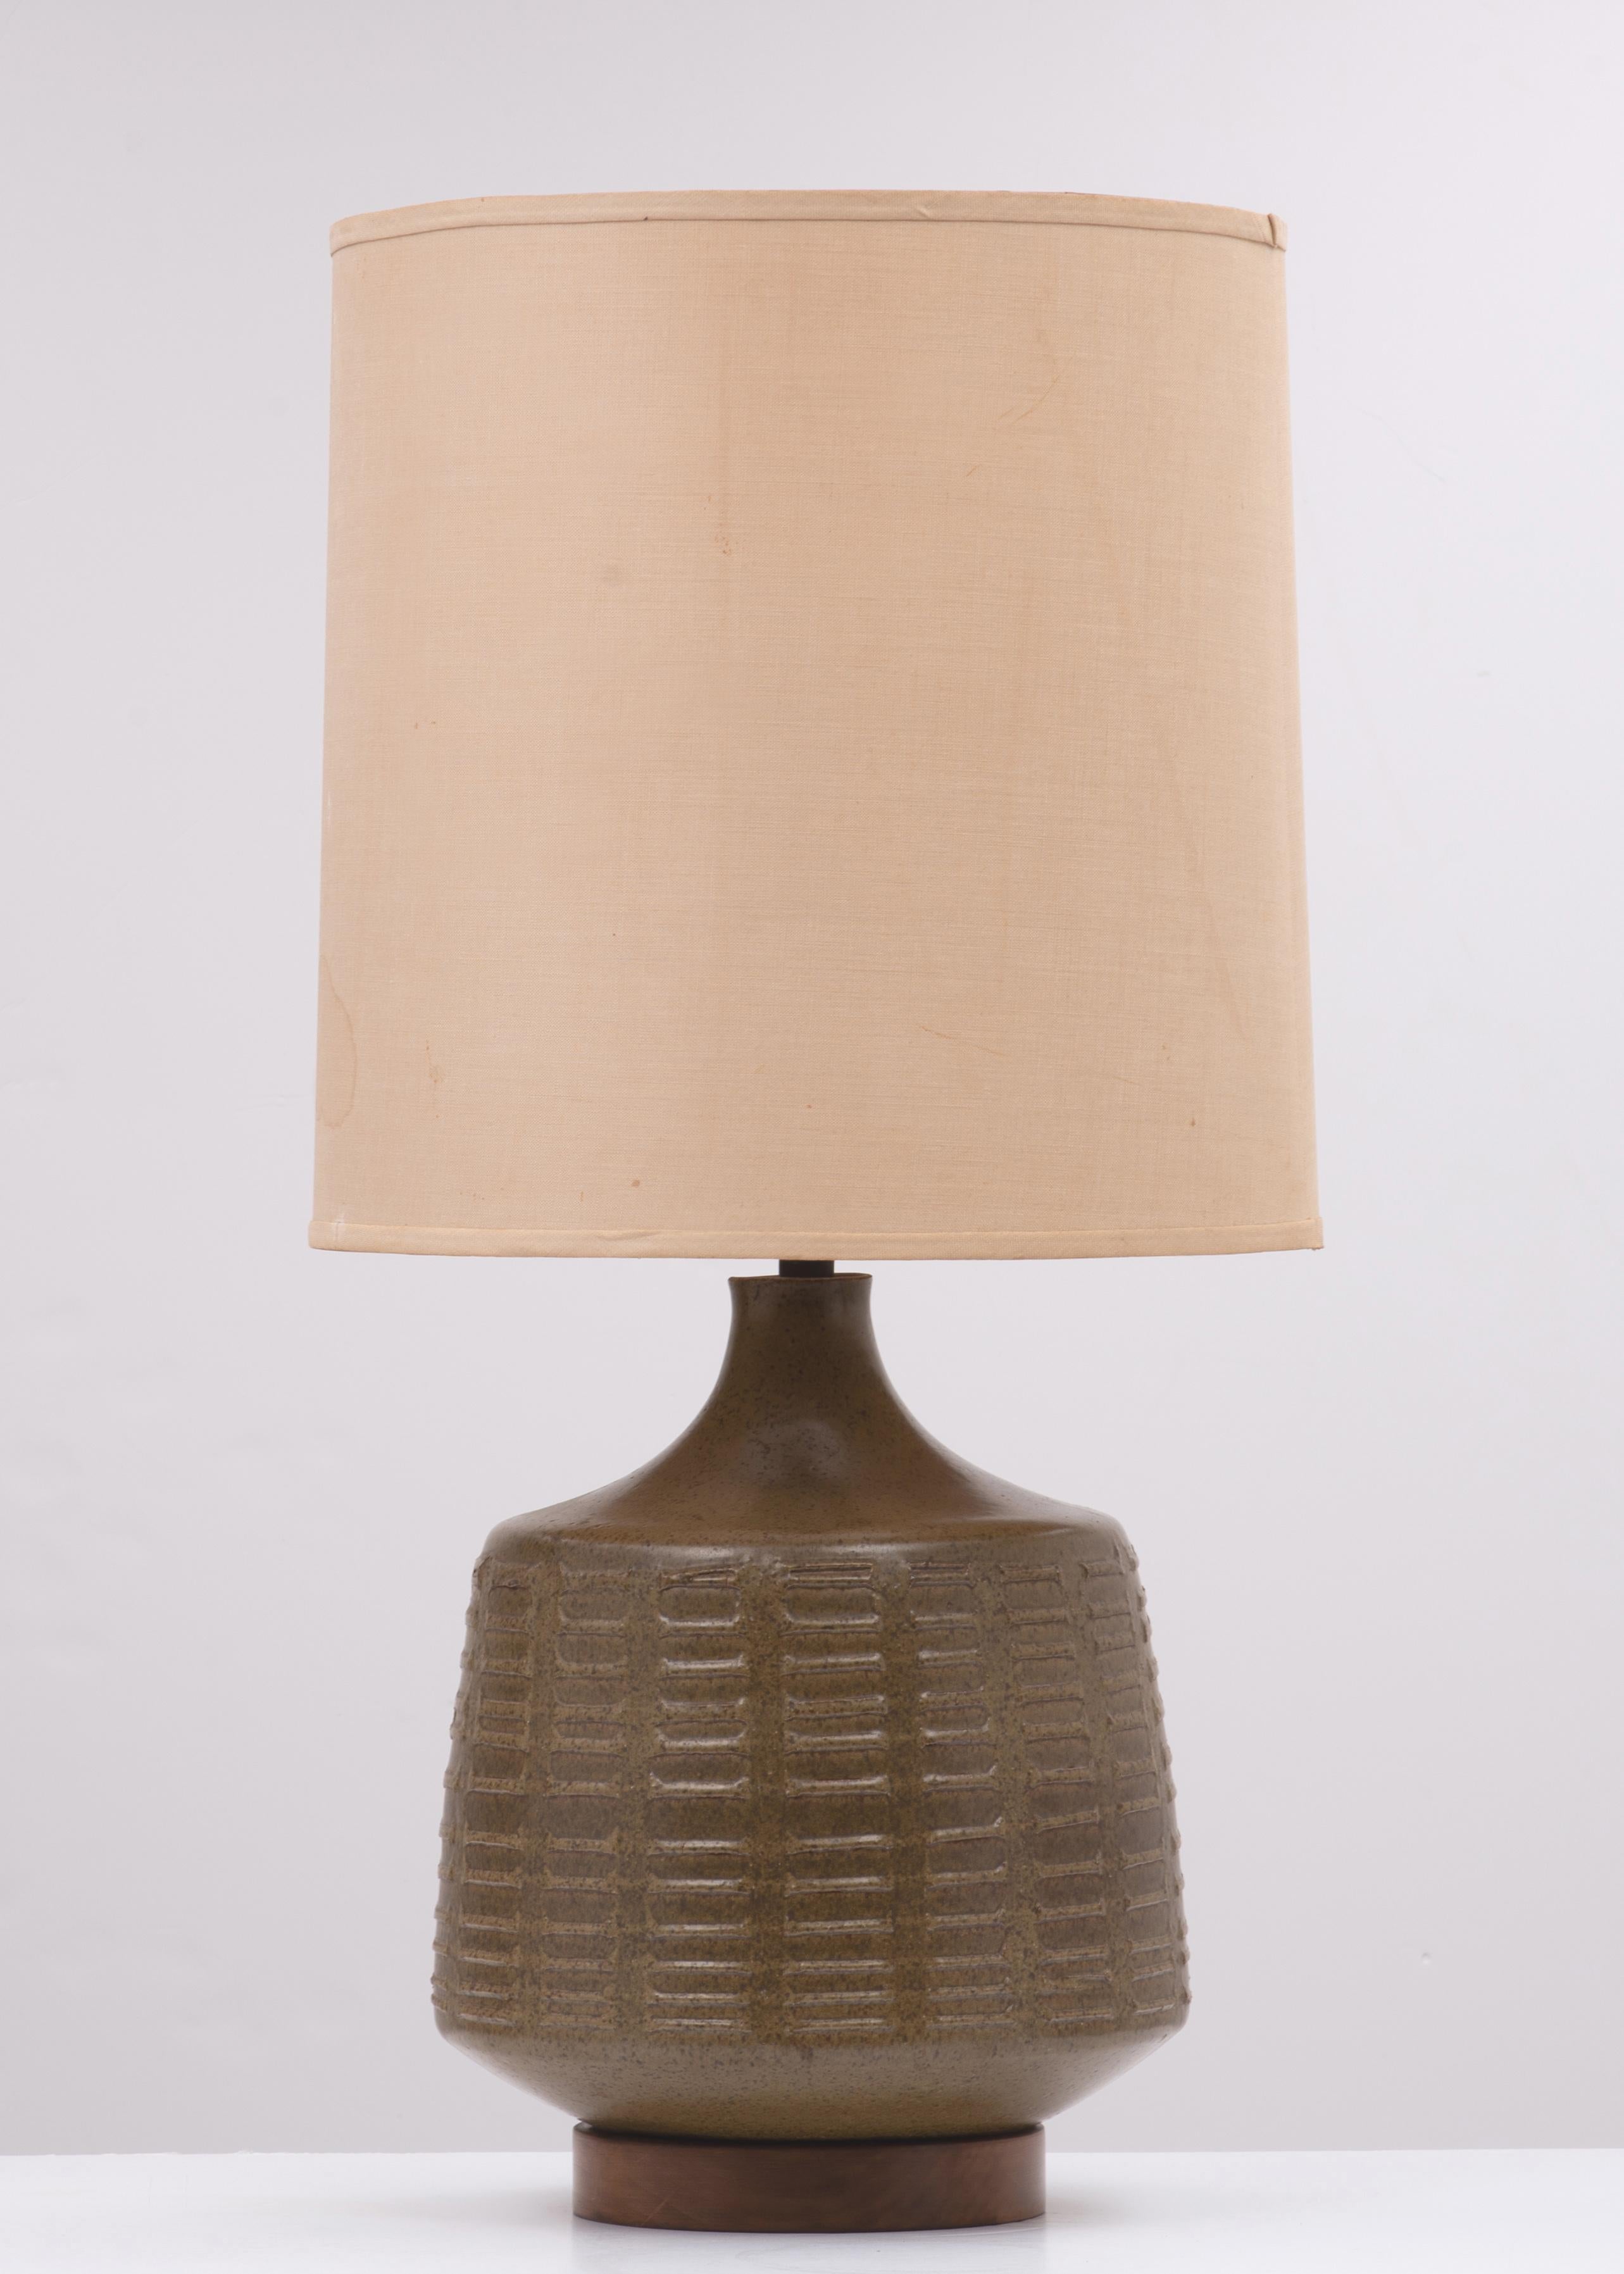 An impressive David Cressey for Architectural Pottery lamp.

The glaze is a semi-gloss dark green with speckled brown on the iconic textured Pro Artisan pattern. The stoneware body sits on a round walnut base. All original including the wiring.